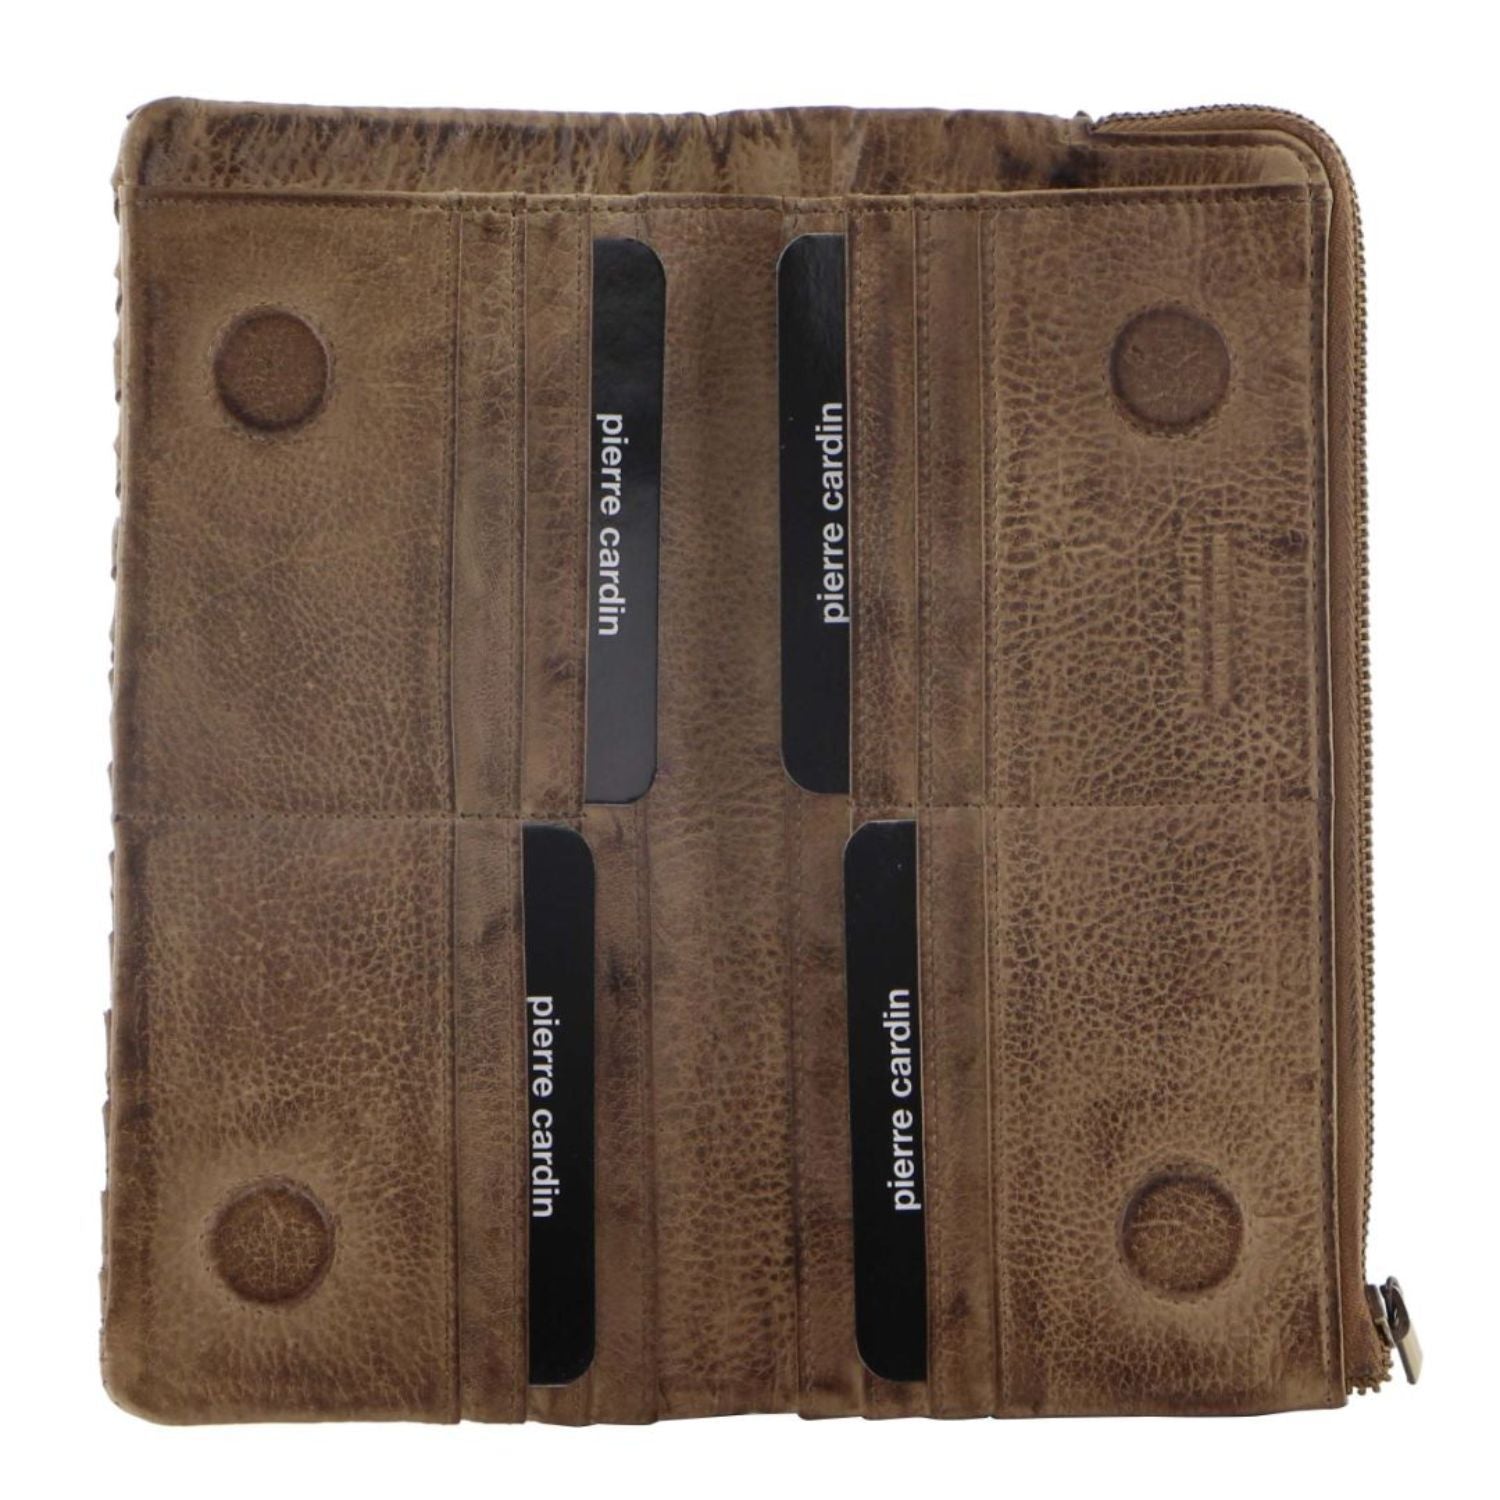 Pierre Cardin Womens Soft Rustic Leather Wallet Coin RFID Purse - Latte - SILBERSHELL